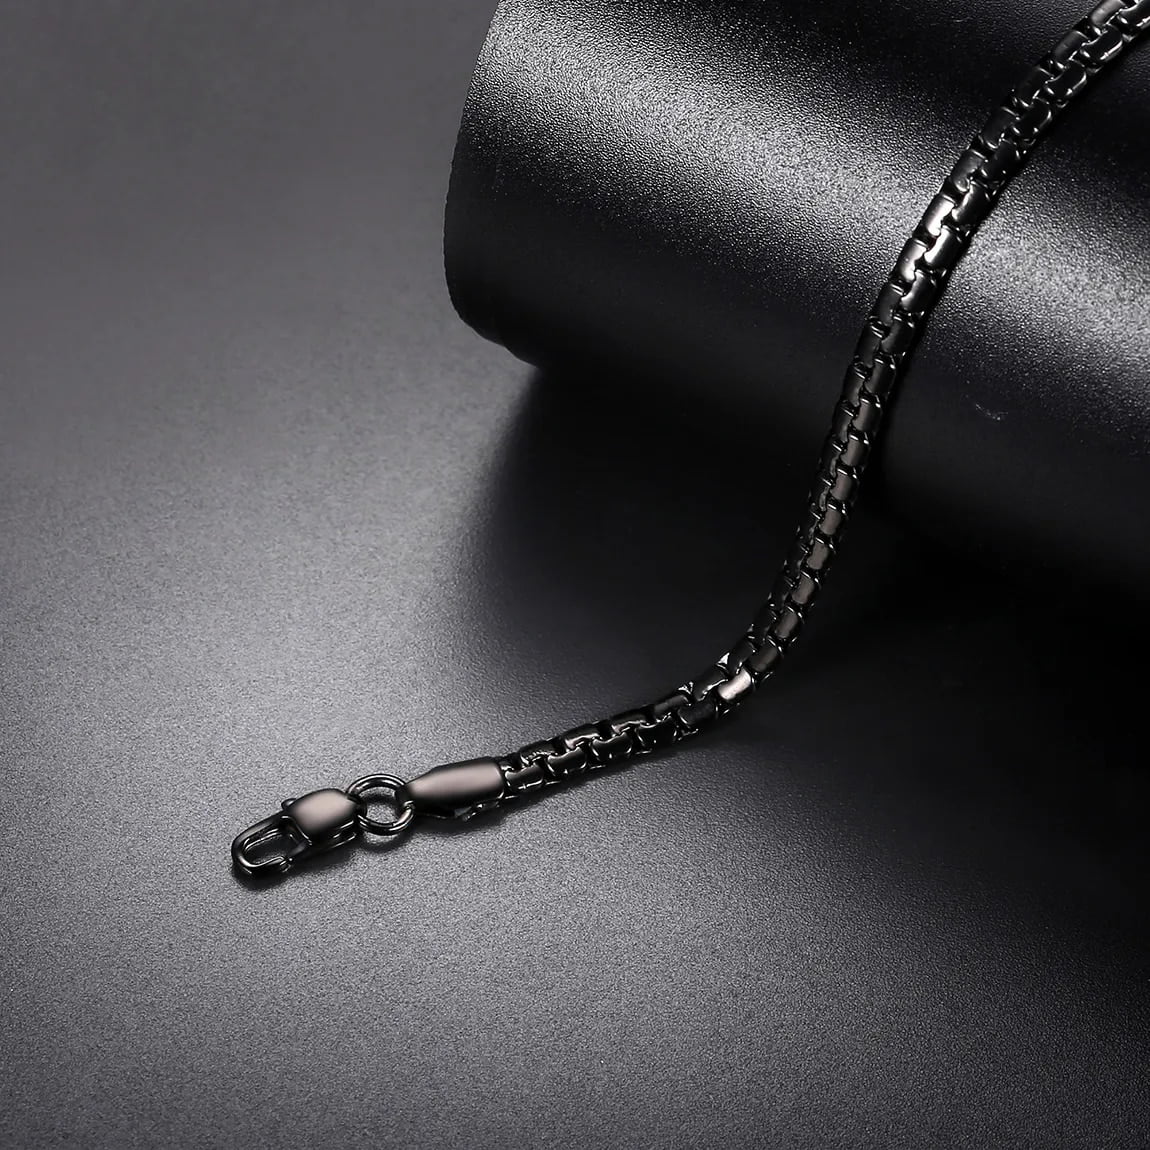 Black Stainless Steel 4mm Box Link Chain Necklace